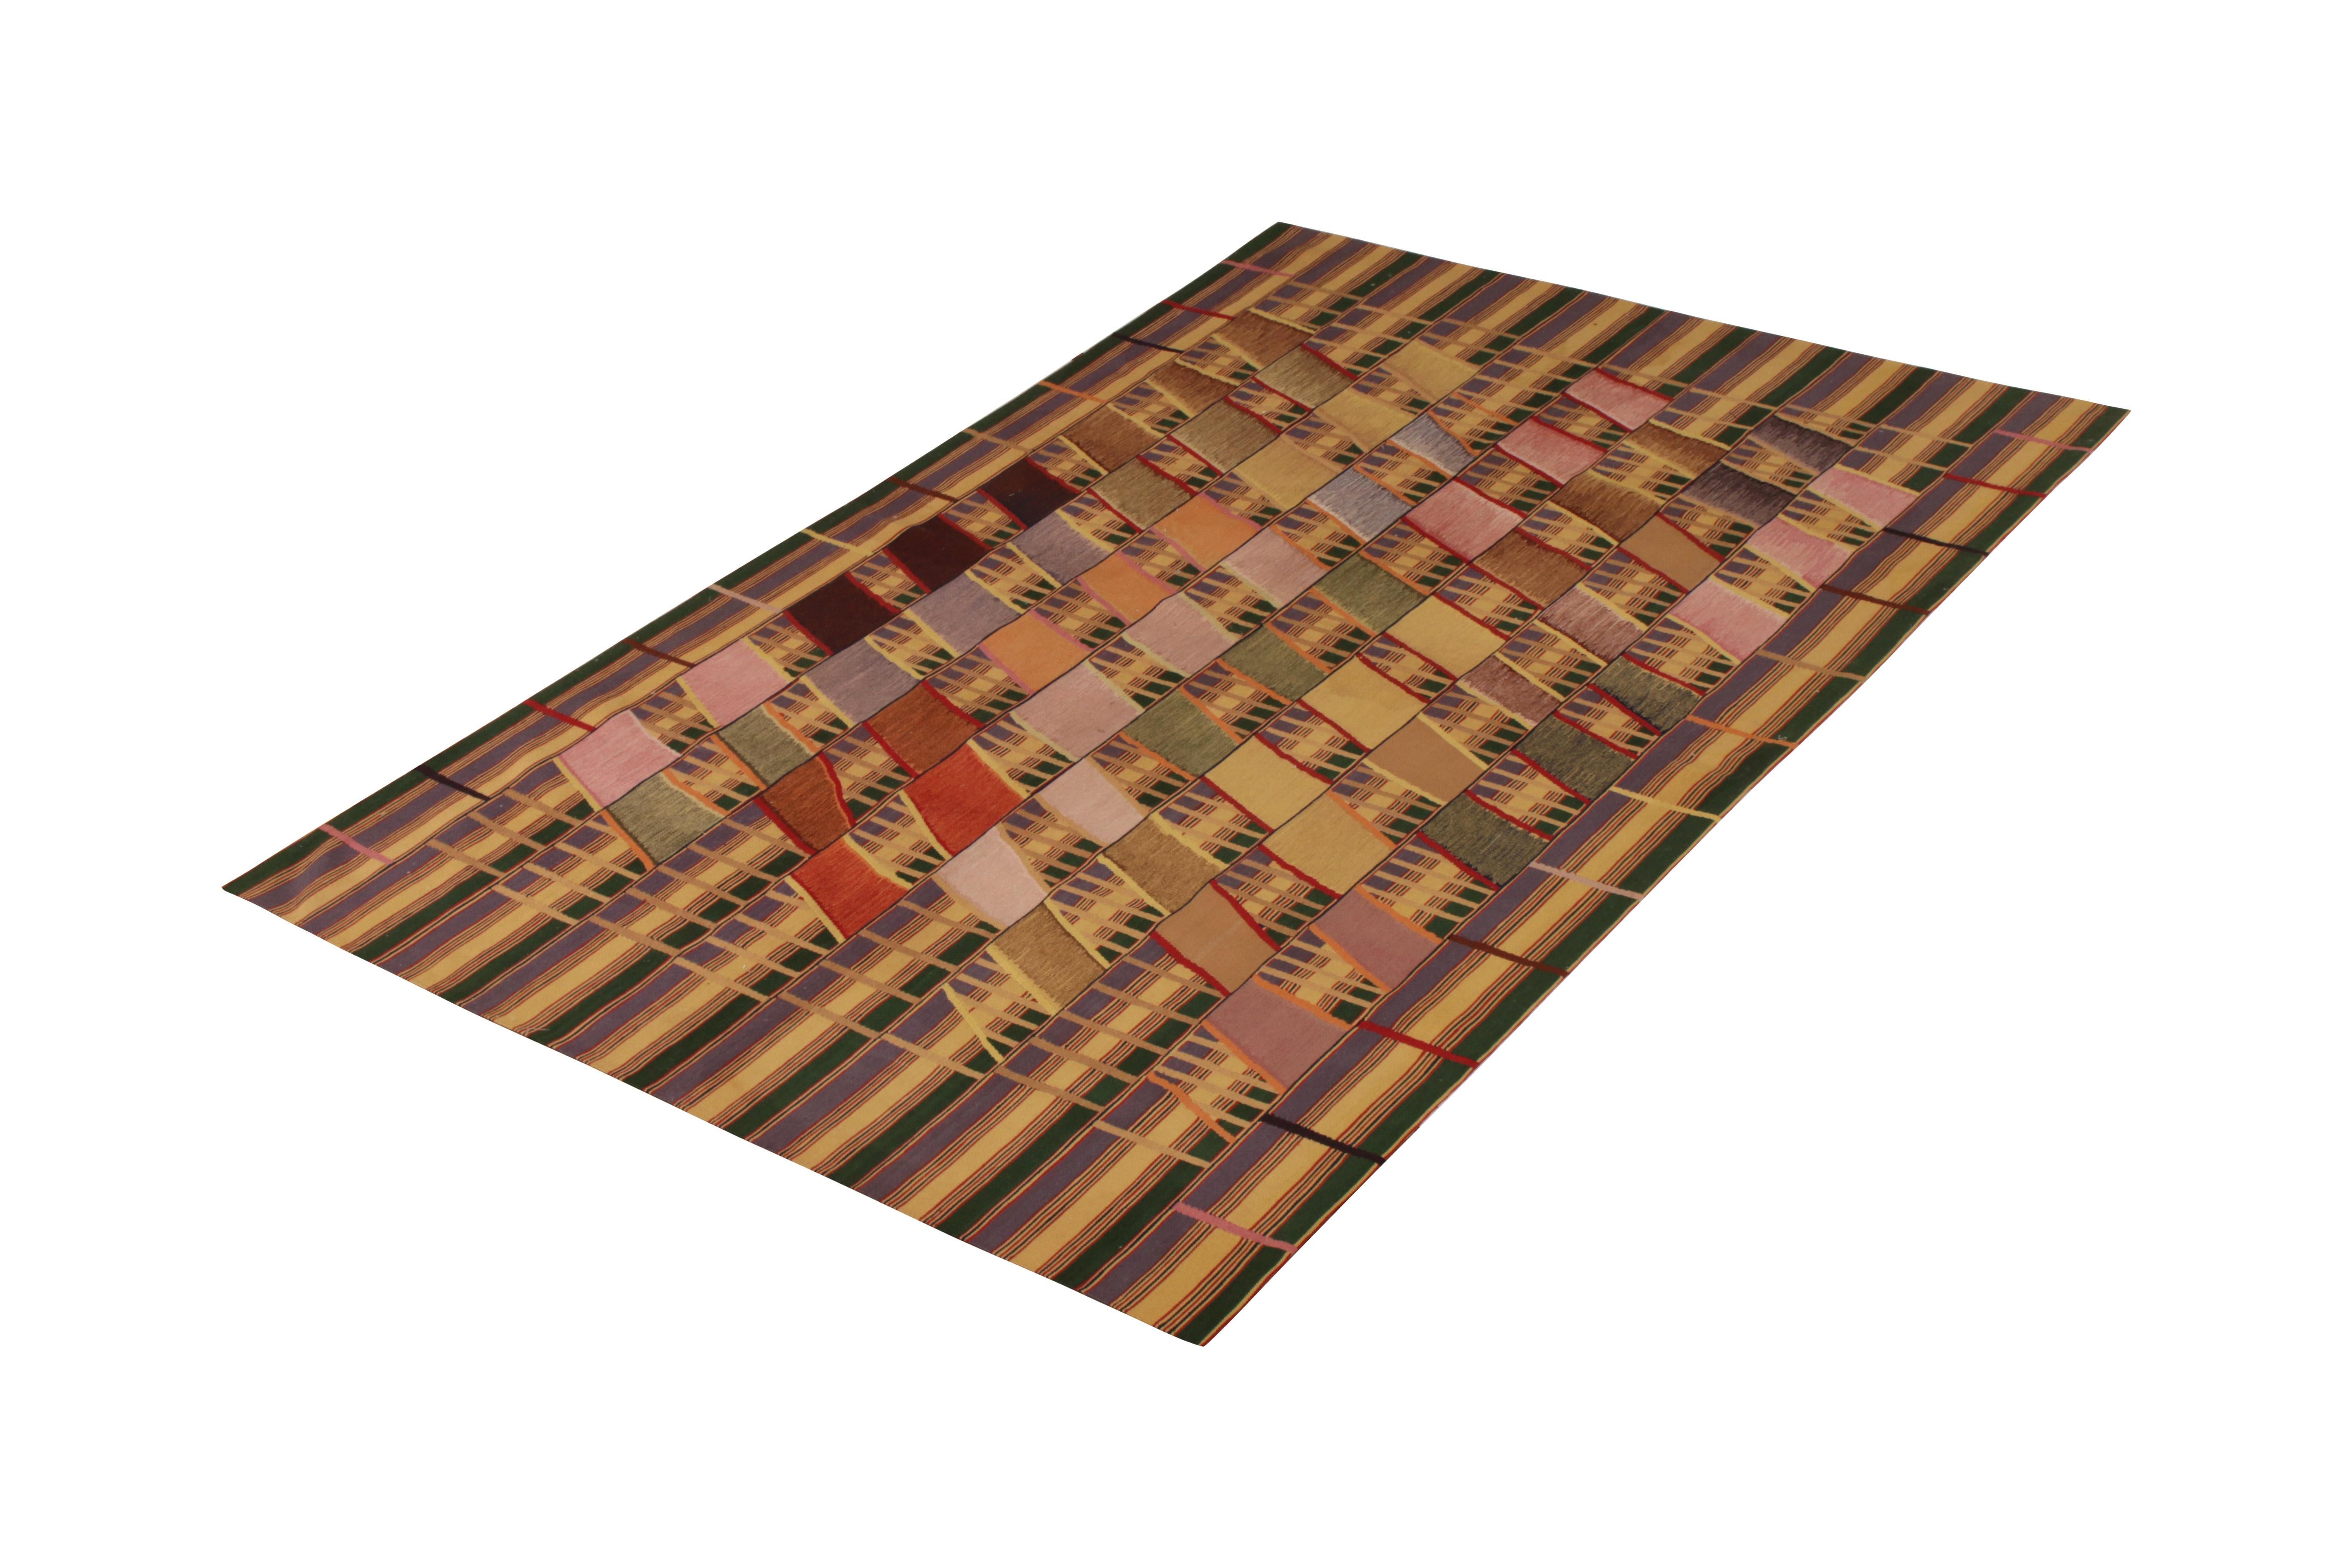 An unveiling from the modern Kilim selections in the Kilim & flat-weave collection from Rug & Kilim-here celebrating a 6 x 9 Kilim from the contemporary works of Teddy Sumner-handmade in a wool flat-weave in this distinctive take on Art Deco style.